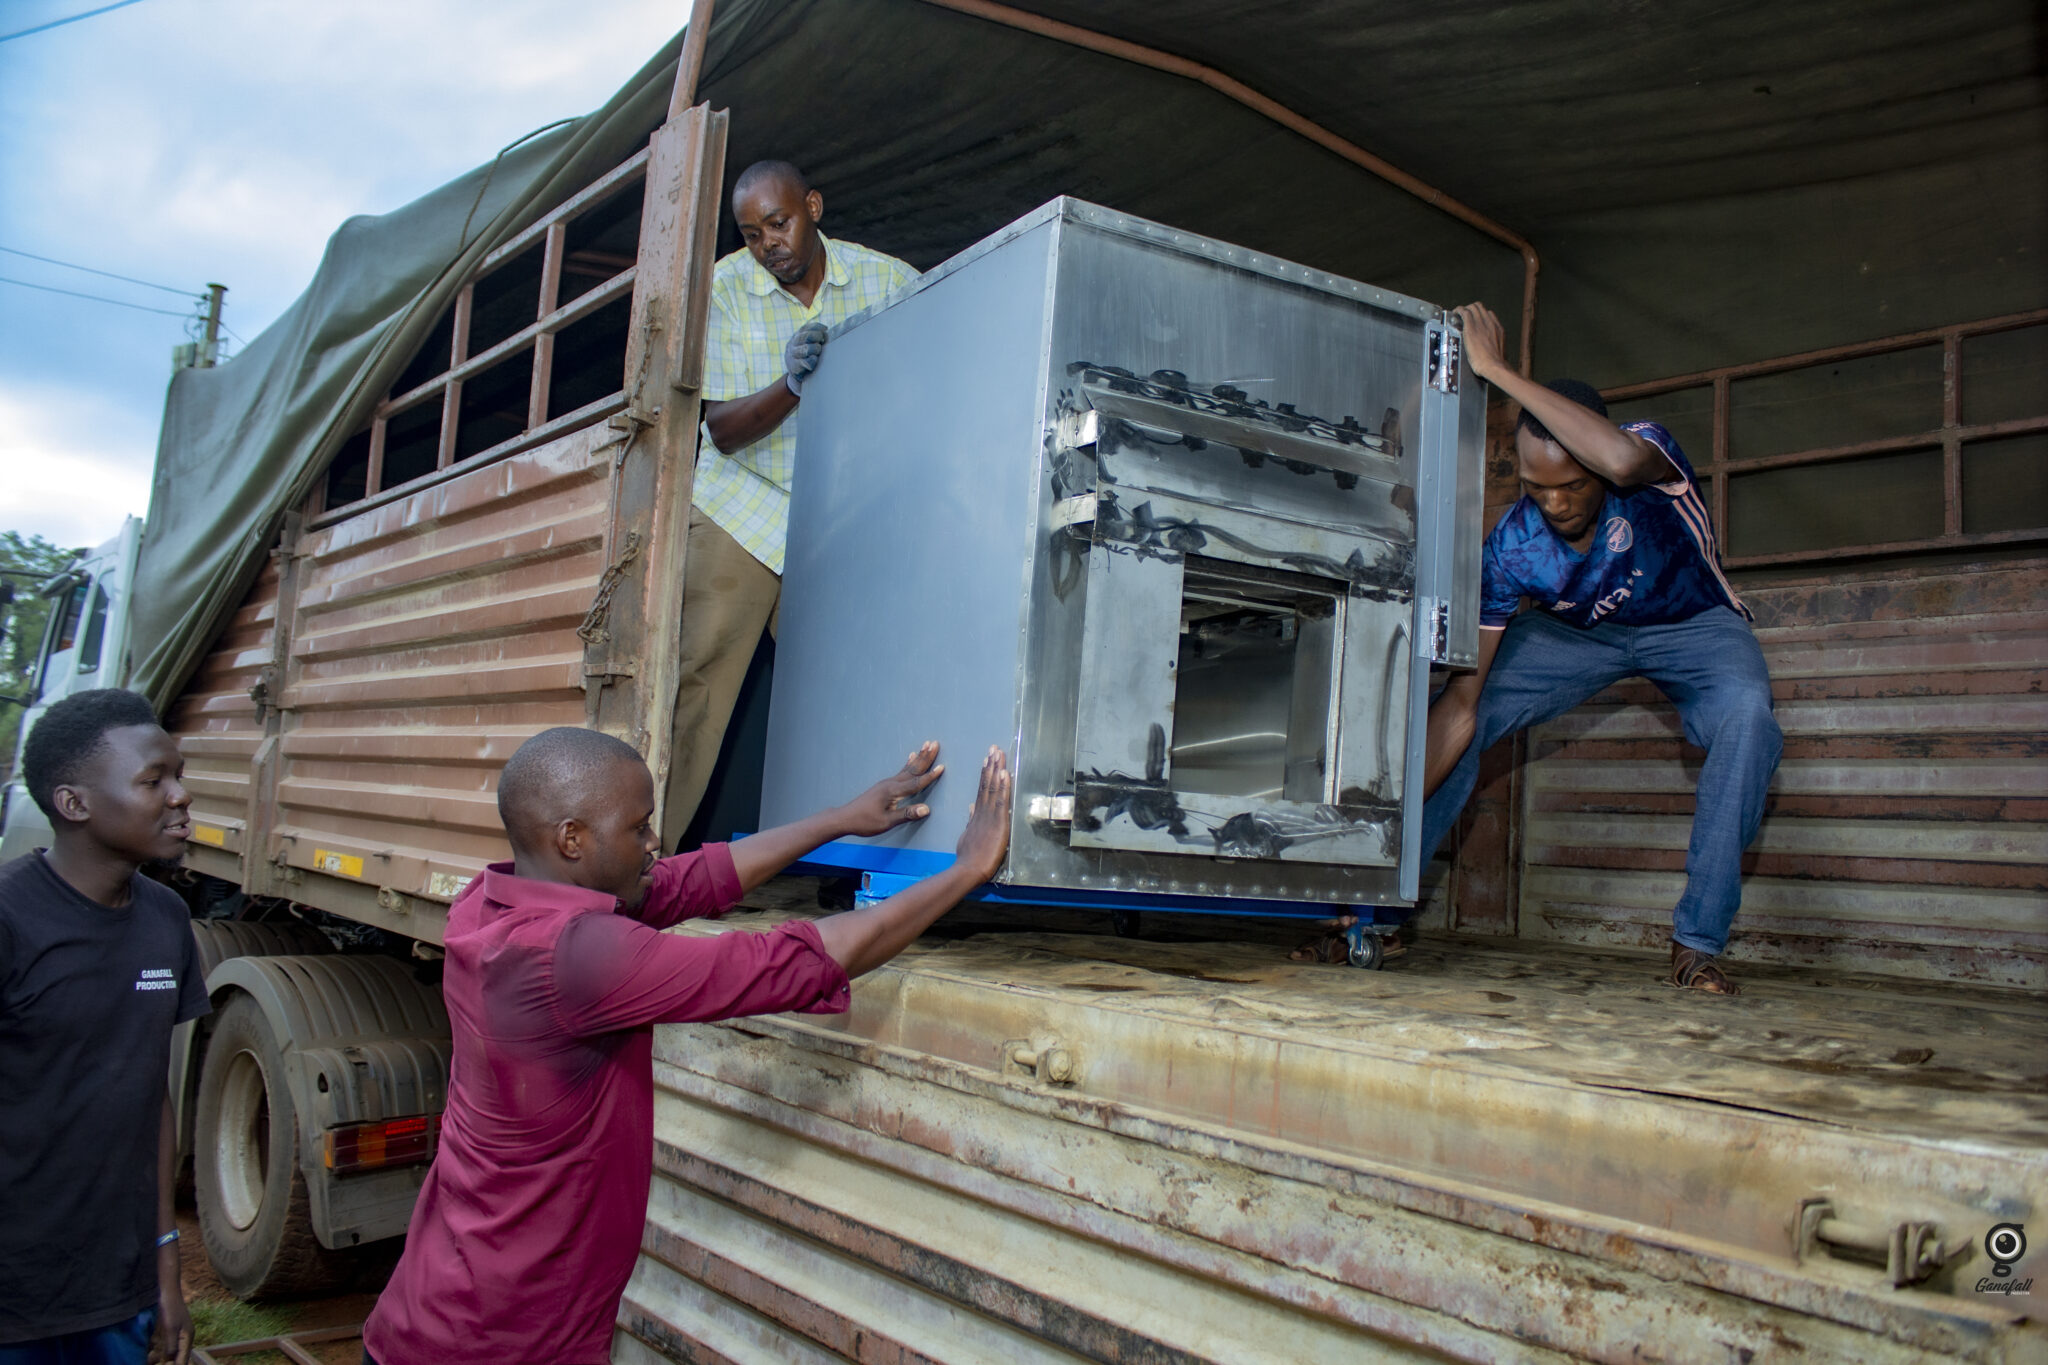 A Lytefire solar oven is unloaded in Bukyerimba, Uganda for a Solar Electric Light Fund project with the Rape Hurts Foundation